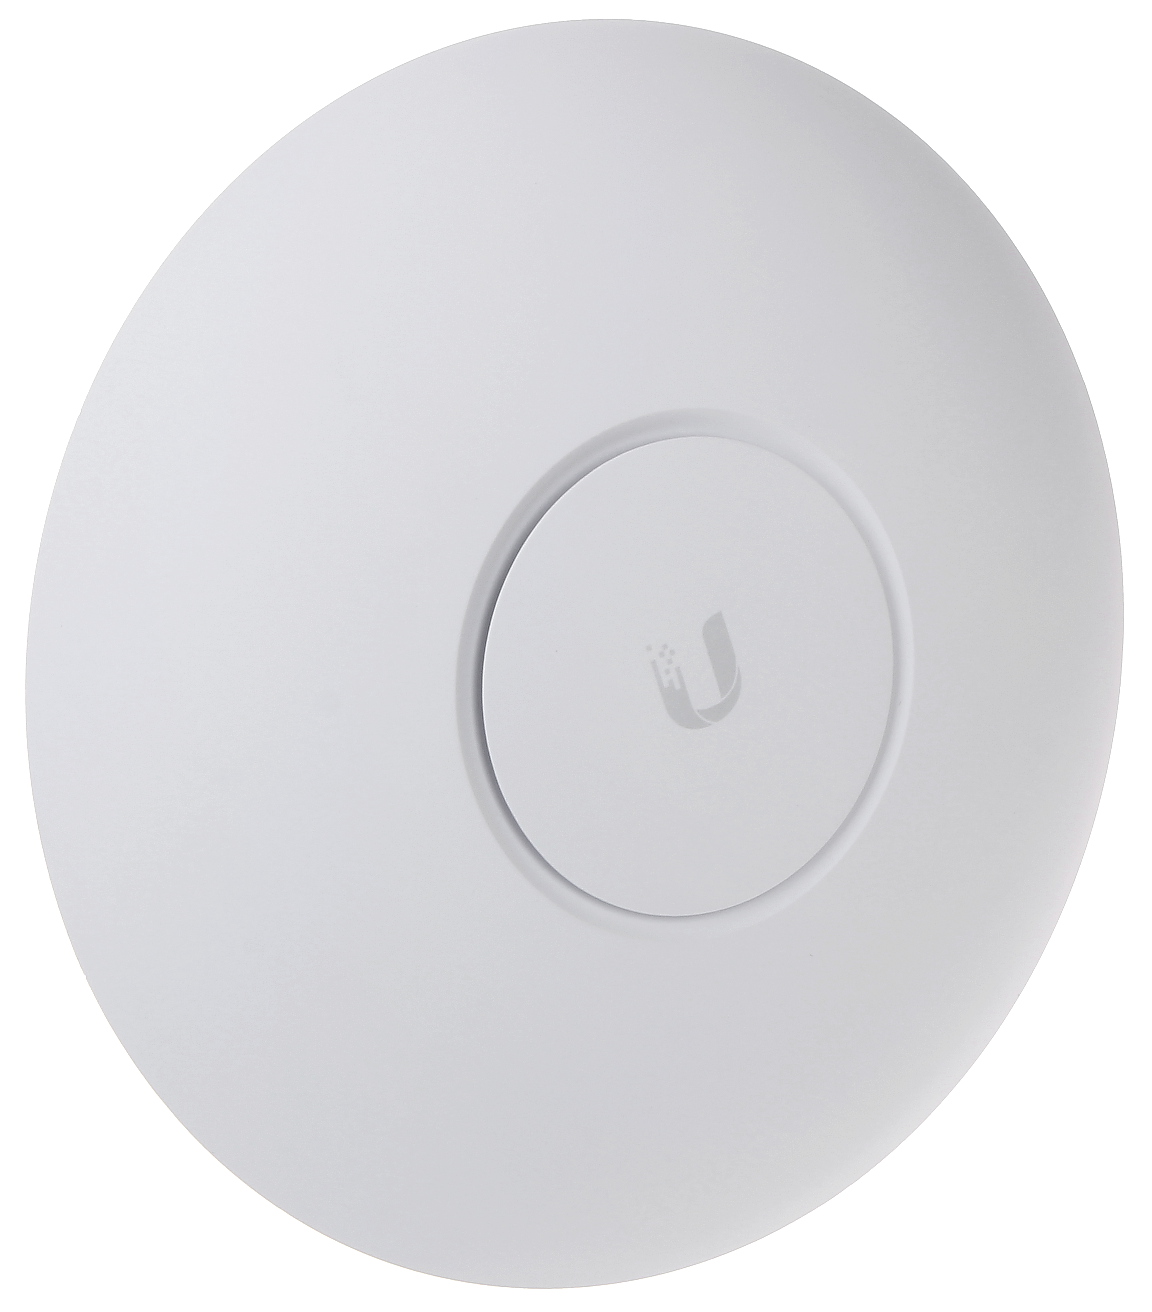 ACCESS POINT UBIQUITI - Routers, 2.4 GHz and 5 GHz Access Points - Delta